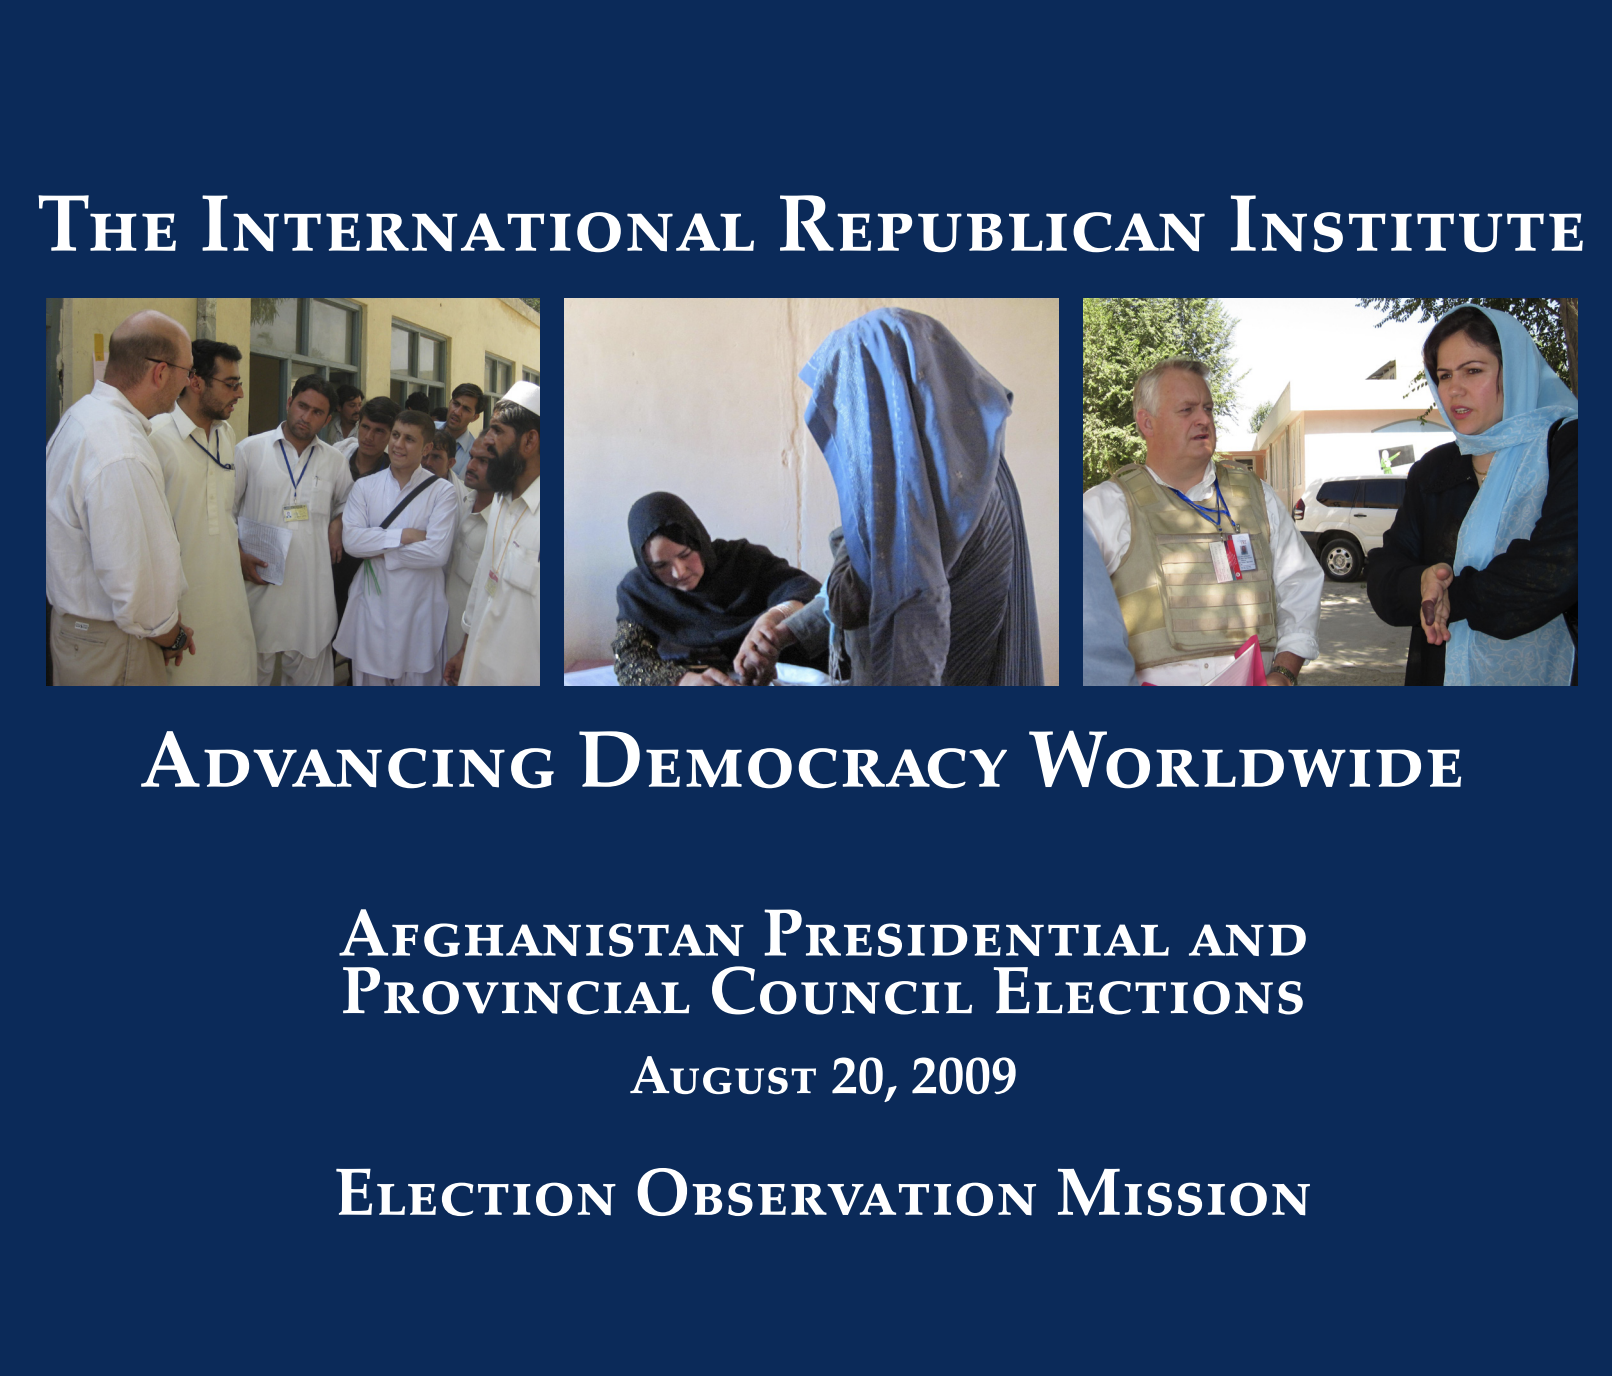 The International Republican Institute Advancing Democracy Worldwide Afghanistan Presidential and Provincial Council Elections August 20, 2009 Election Observation Mission